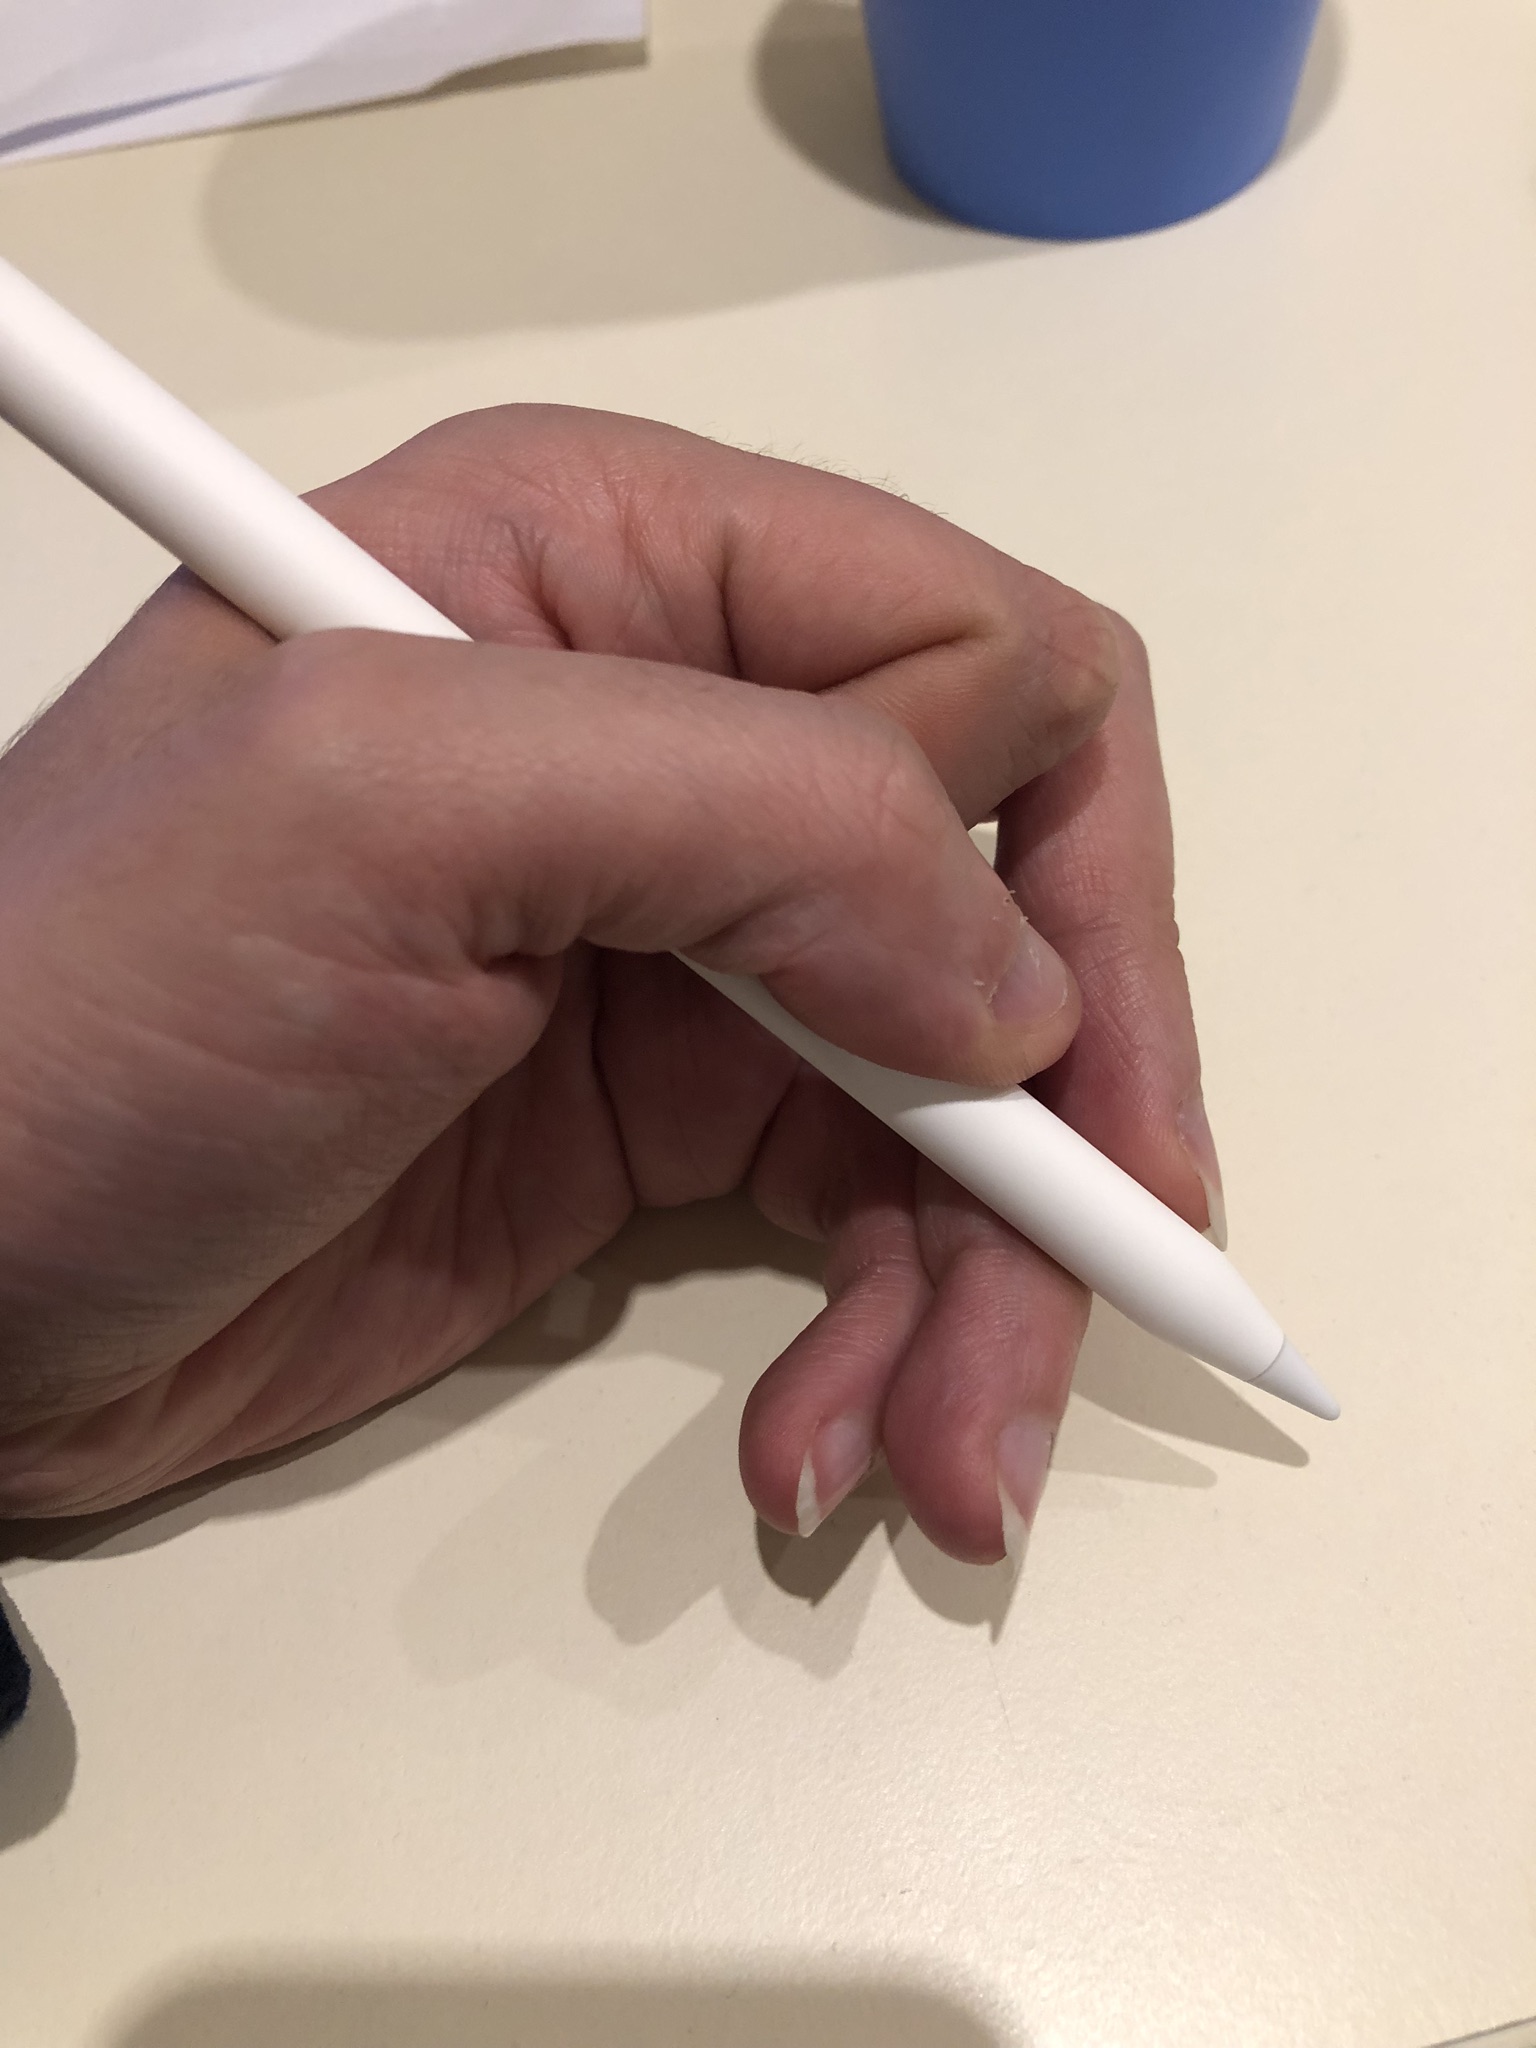 Where should I put my Apple Pencil when I'm not using it?